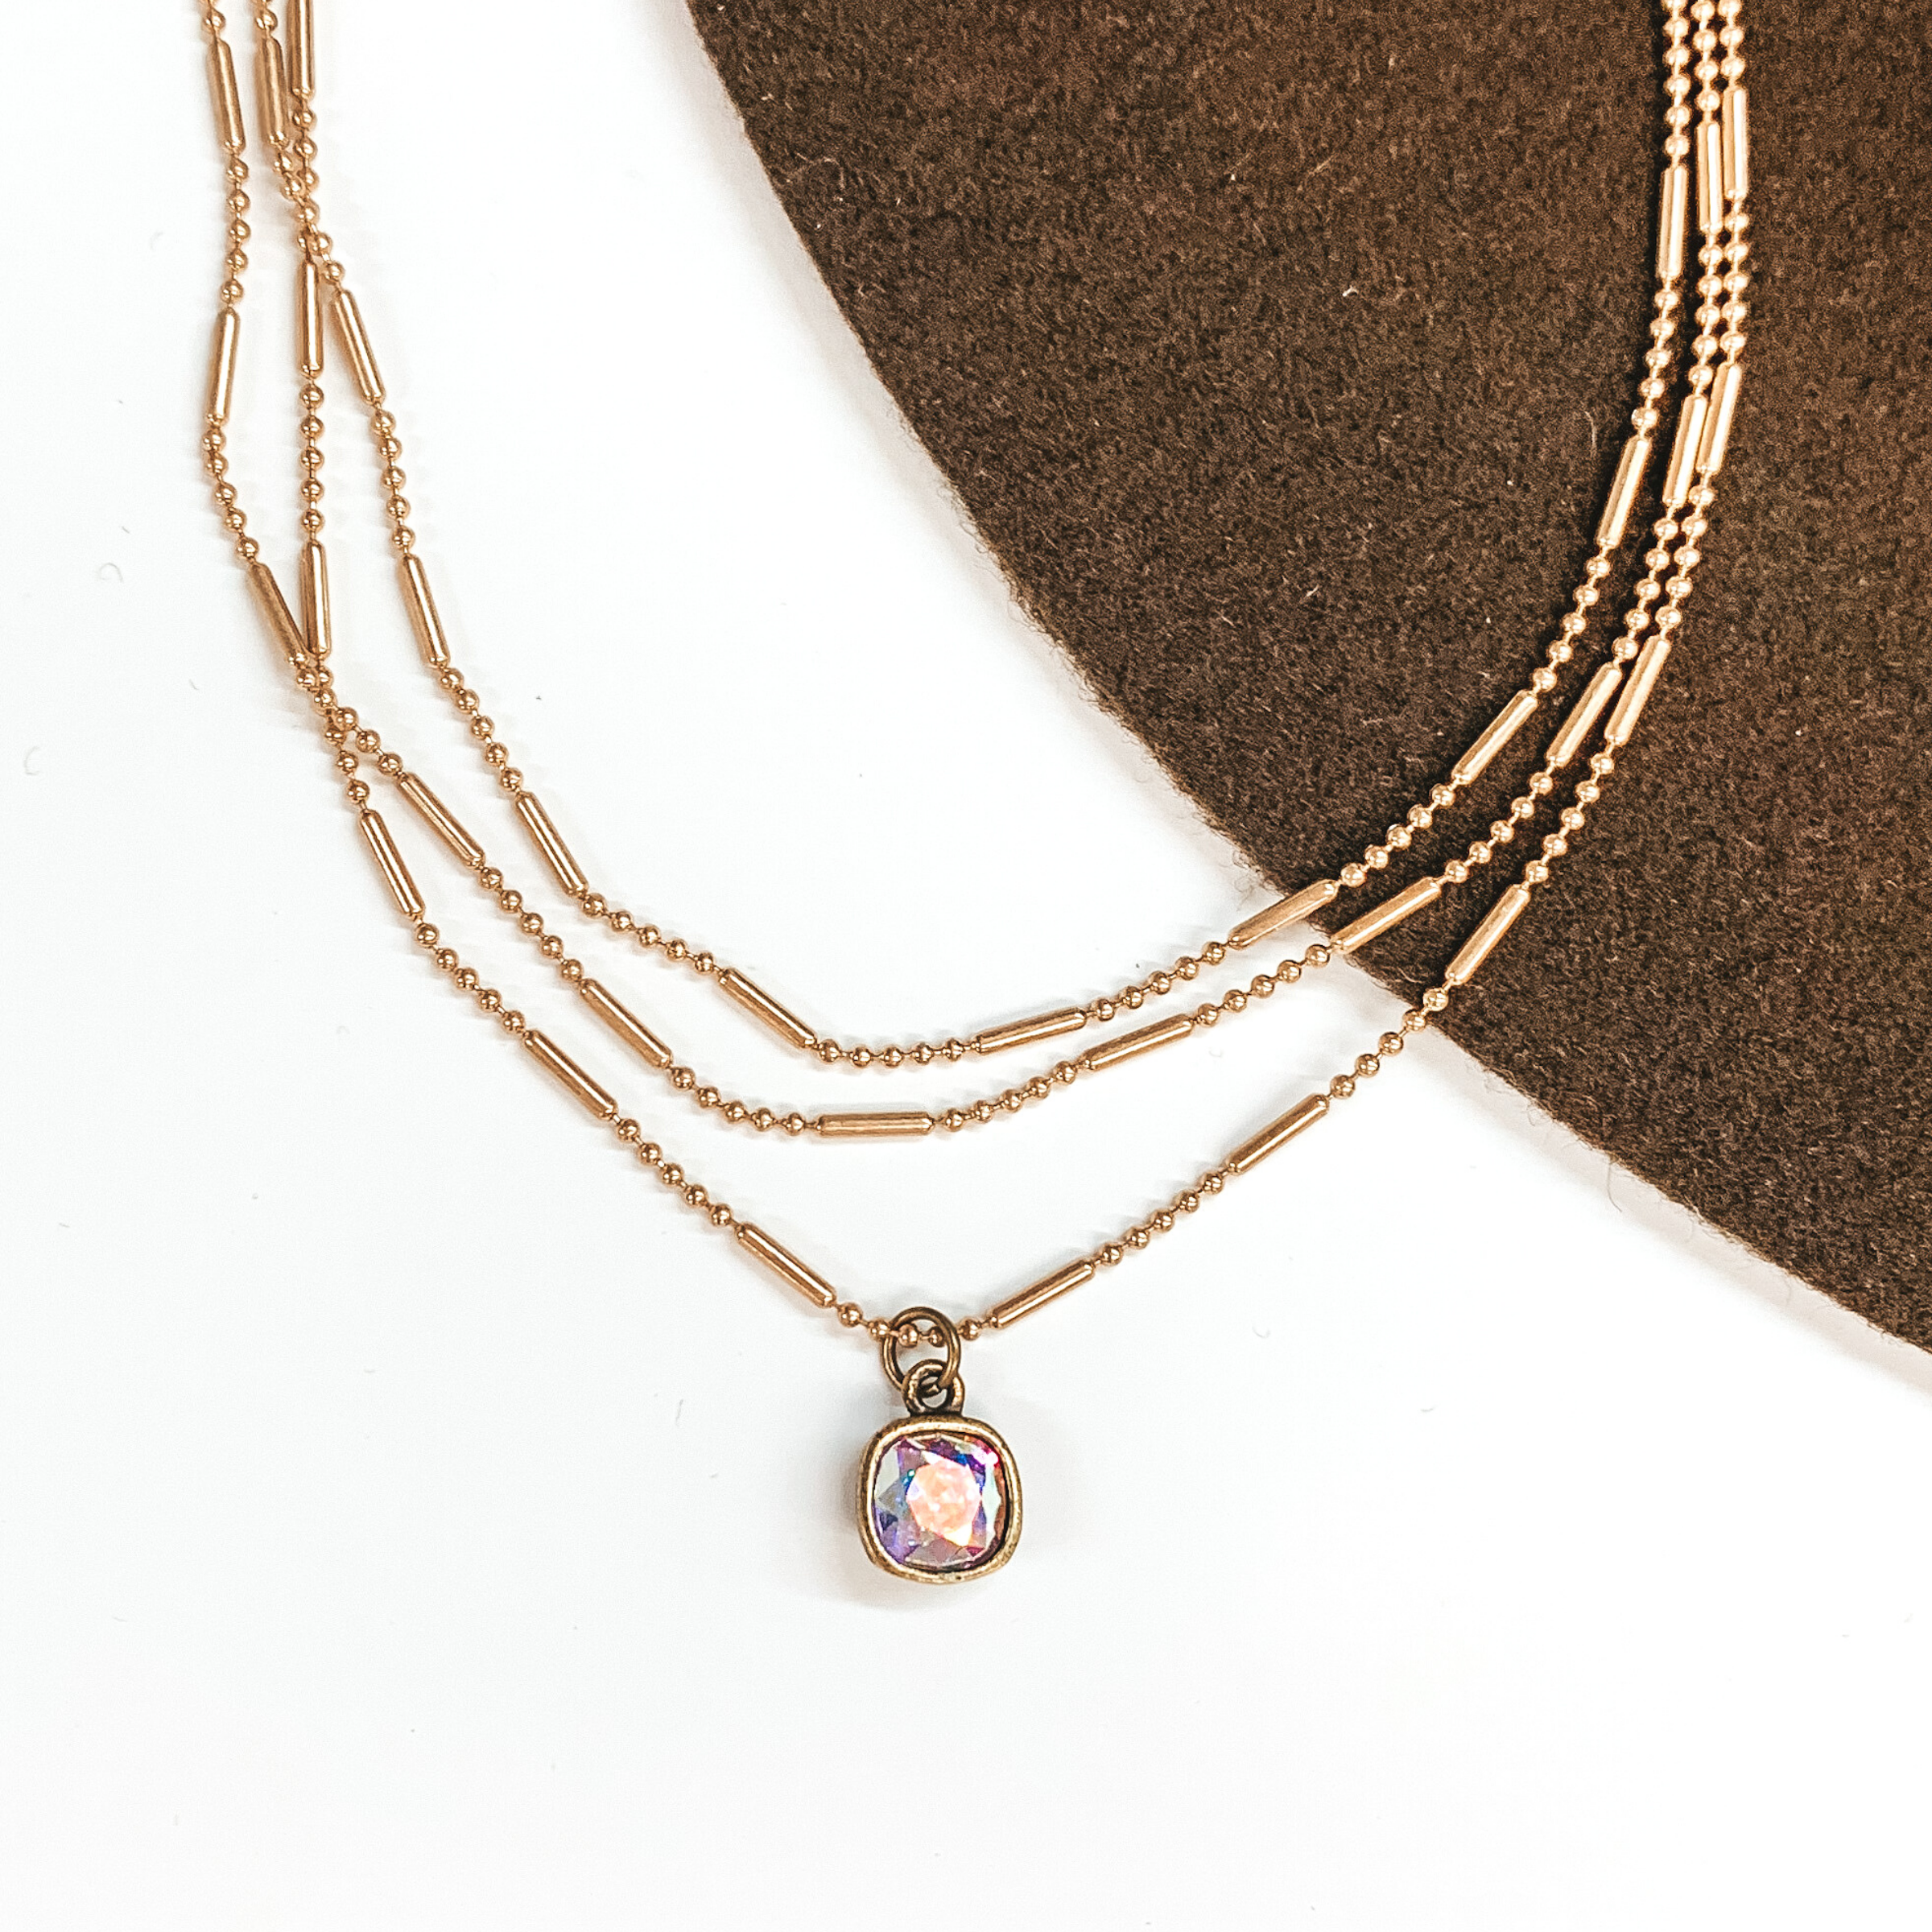 Pink Panache | Three Strand Gold Dot and Bar Chain Necklace with AB Cushion Cut Crystal Drop - Giddy Up Glamour Boutique